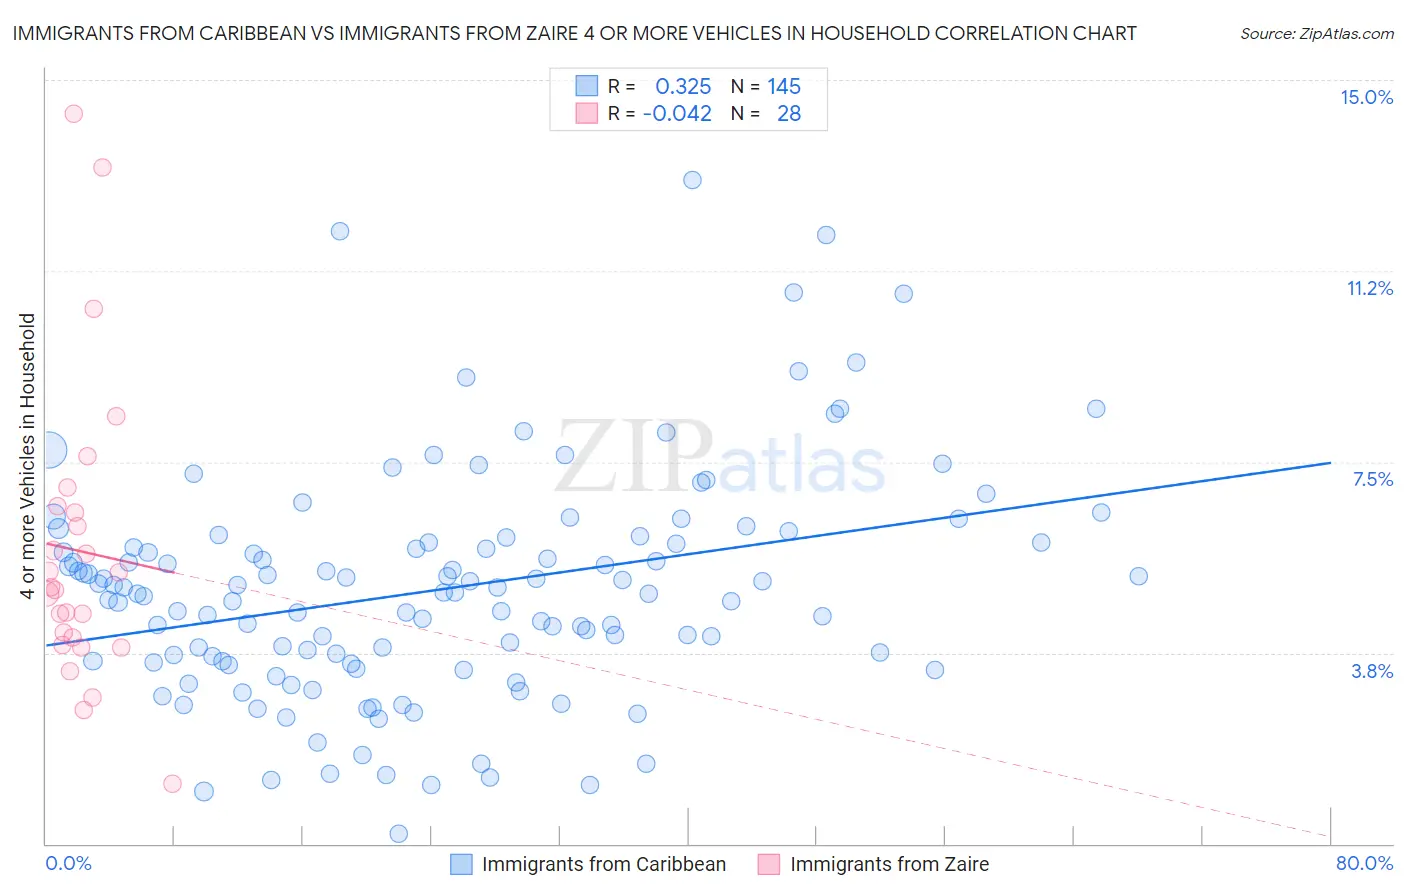 Immigrants from Caribbean vs Immigrants from Zaire 4 or more Vehicles in Household